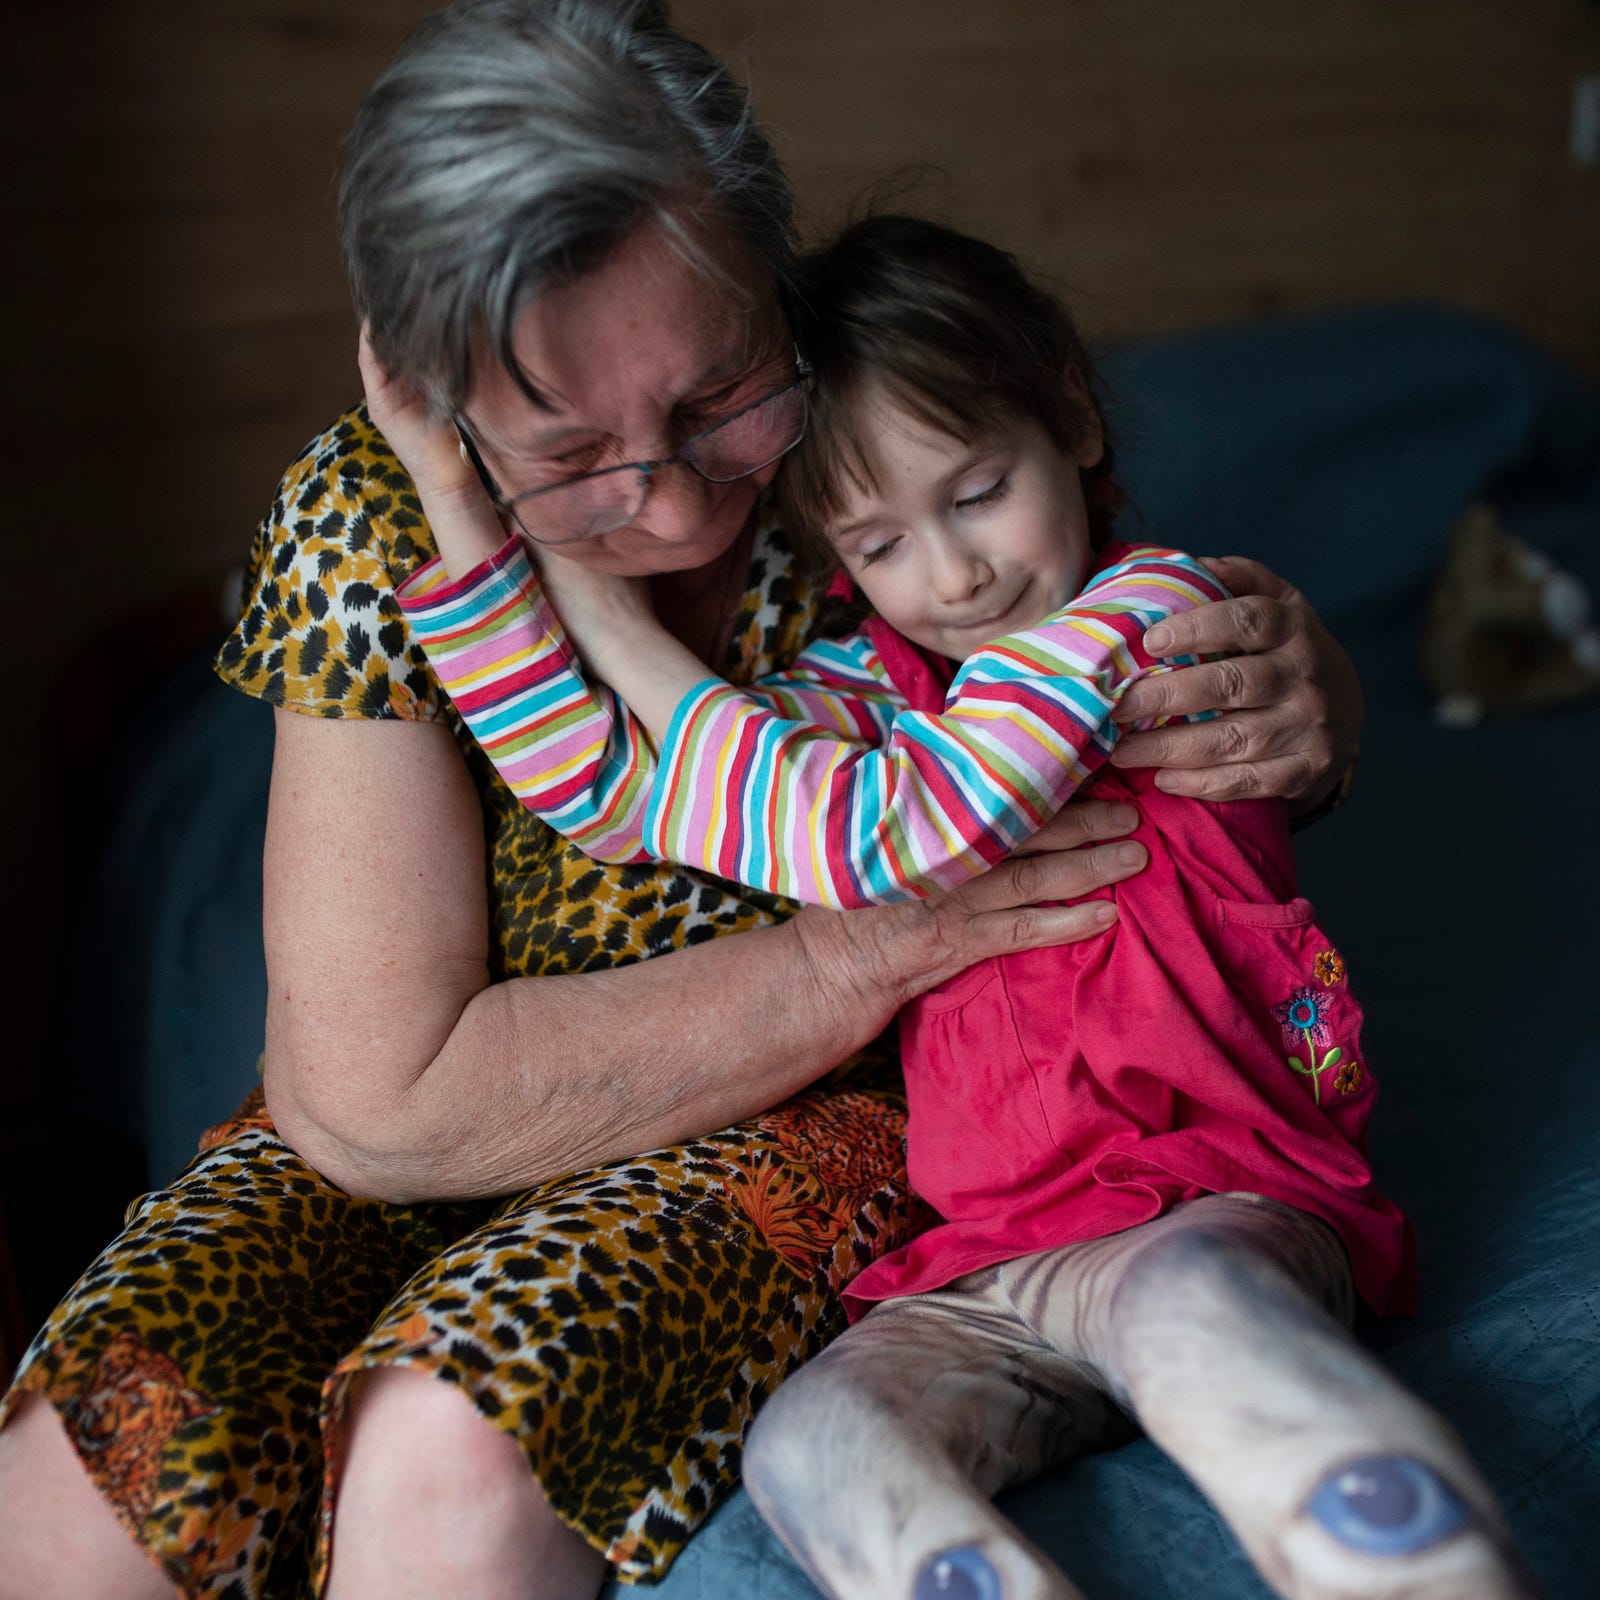 Valentina Ukhvatova, 75, of Dnipro shares a hug with her great granddaughter Evheniia Ukhvatova, 6, of Dnipro, Ukraine, in their hotel room on Wednesday, May 17, 2023 in Leczna, Poland as Evheniia recovers from surgery she had the twos days before. Evheniia Ukhvatova had surgery on burn scars that cover the backs of her legs and feet due to the contractures of old scar tissue.